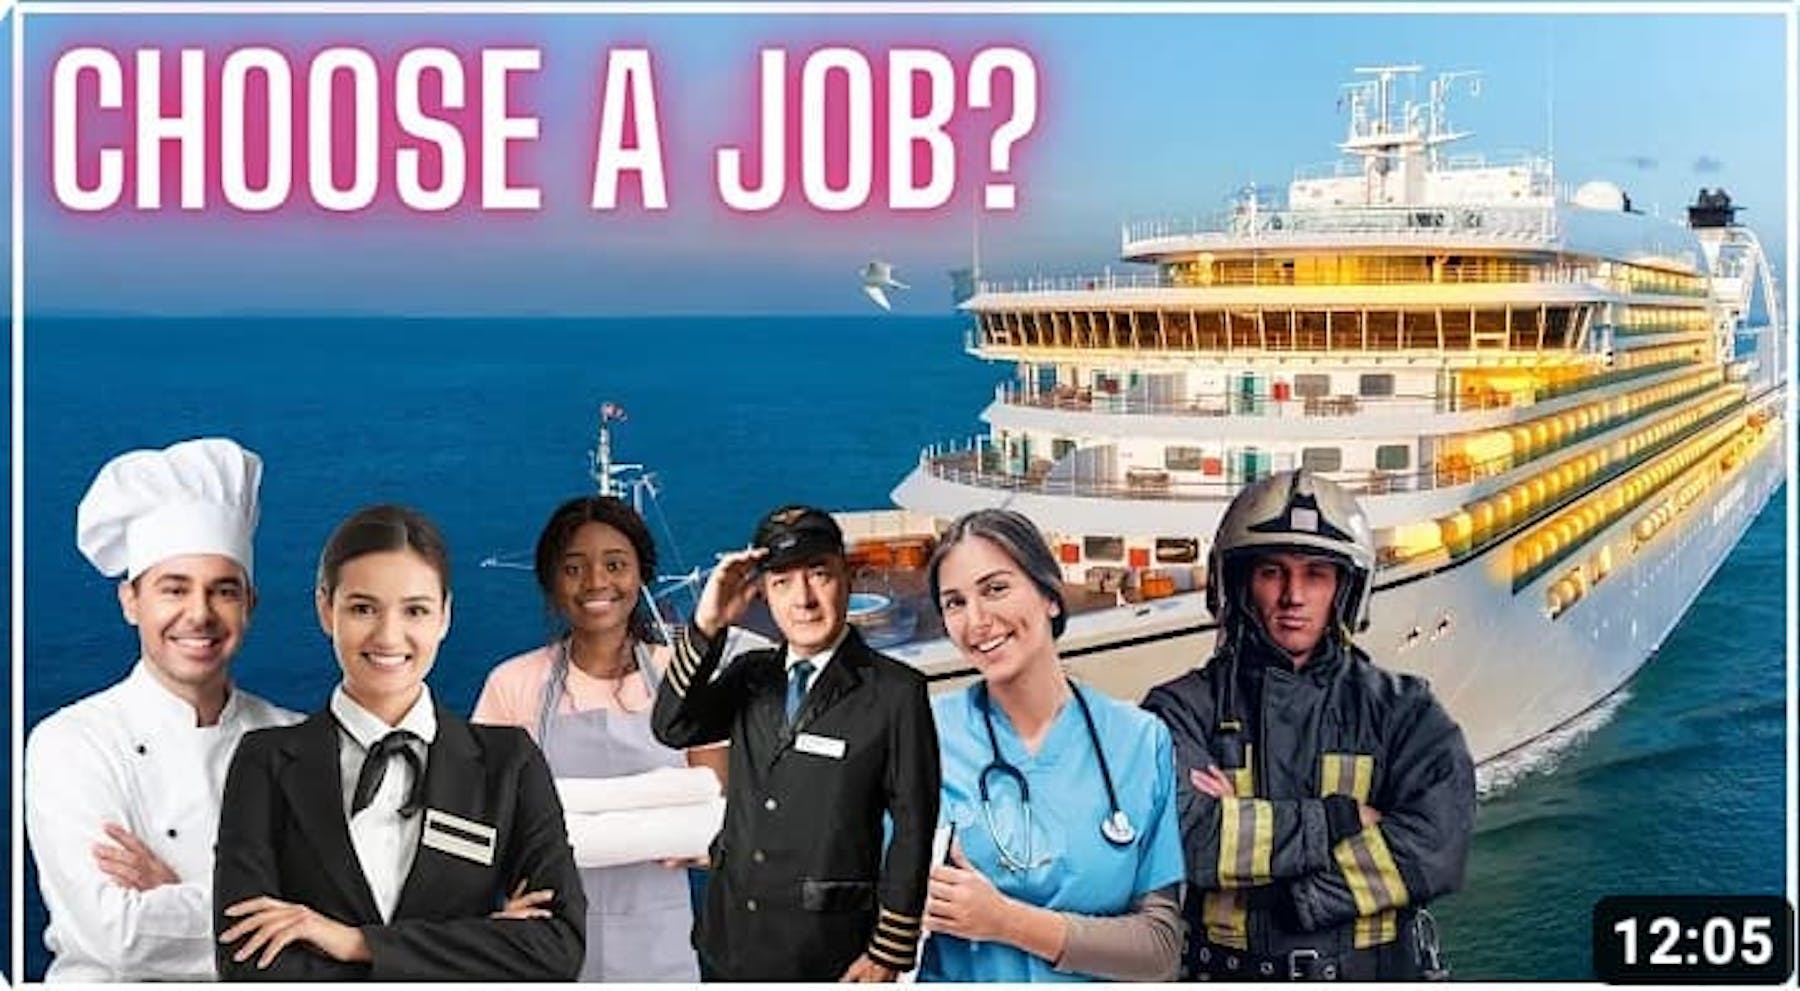 choose a job? with jobs on a cruise ship